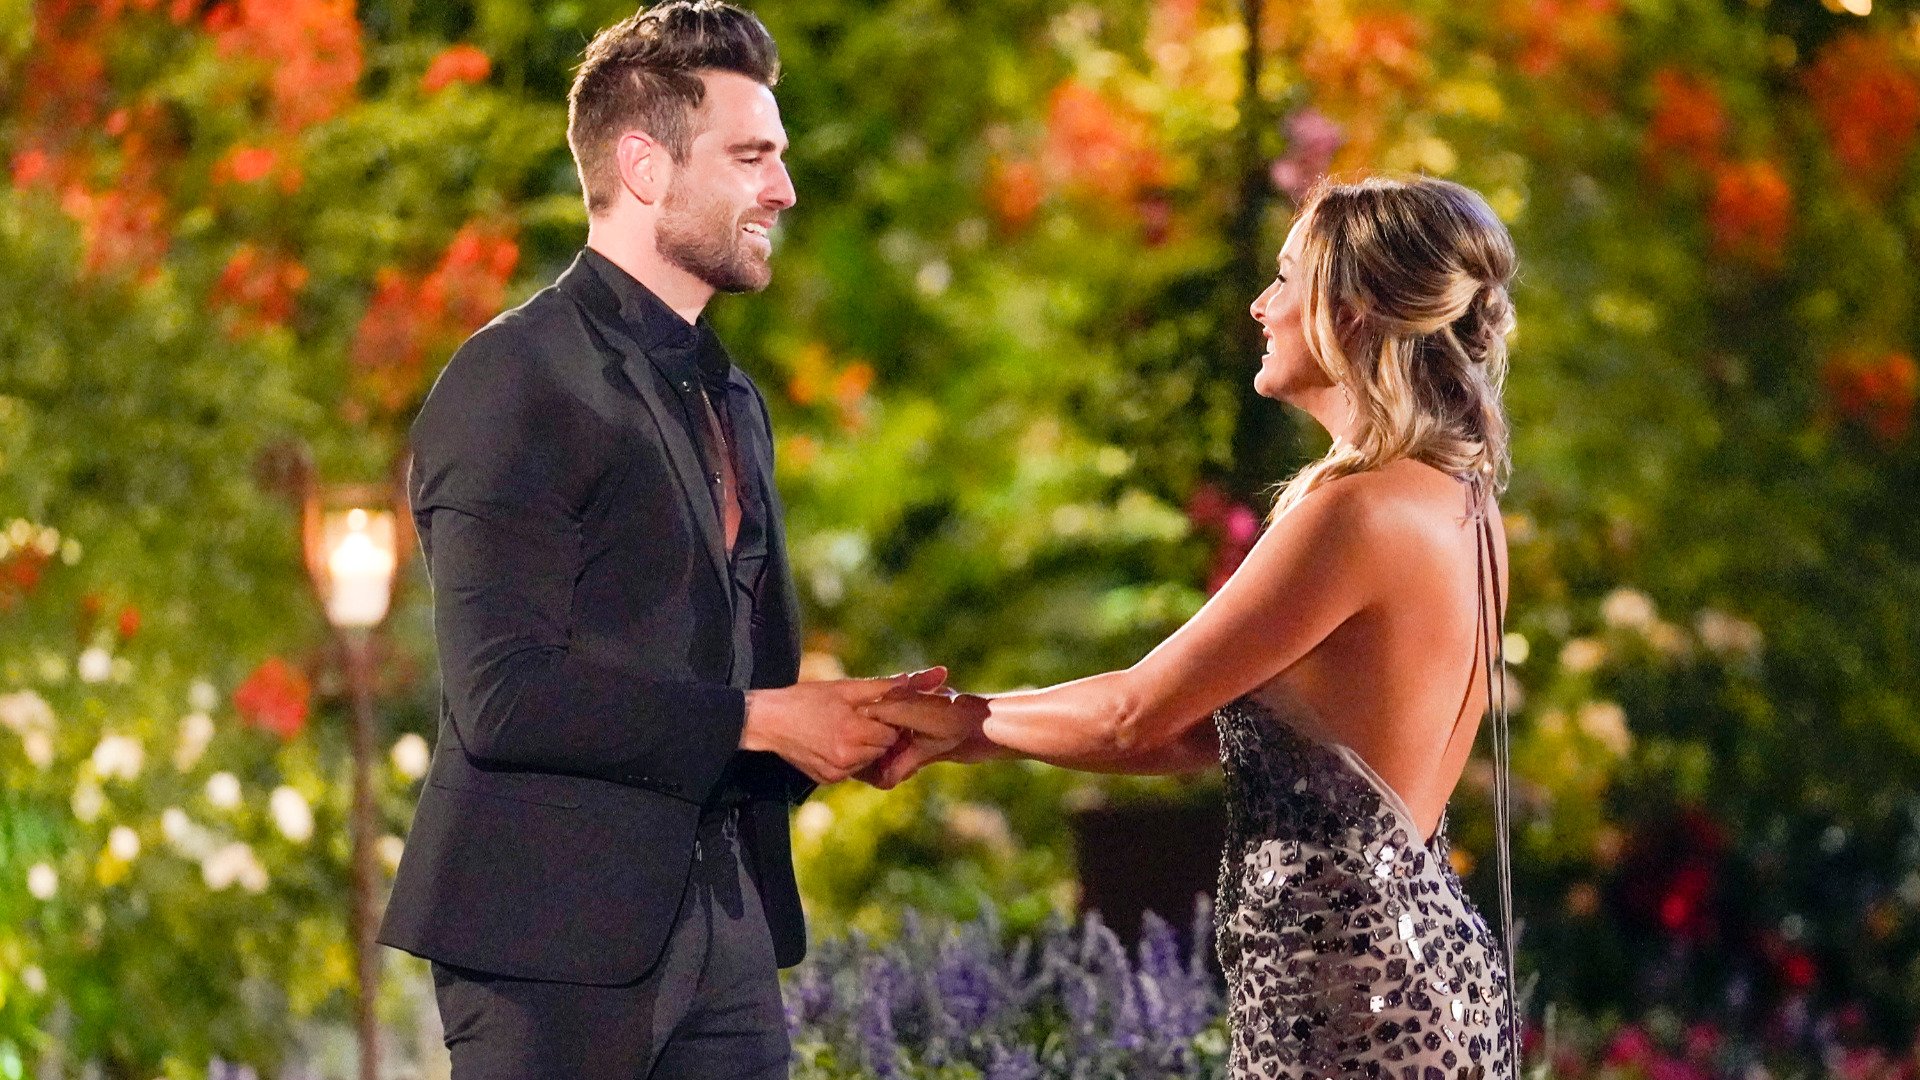 ‘The Bachelorette’: Are Clare Crawley and Blake Monar Dating? Here’s Why Fans Are Buzzing About the Relationship Now